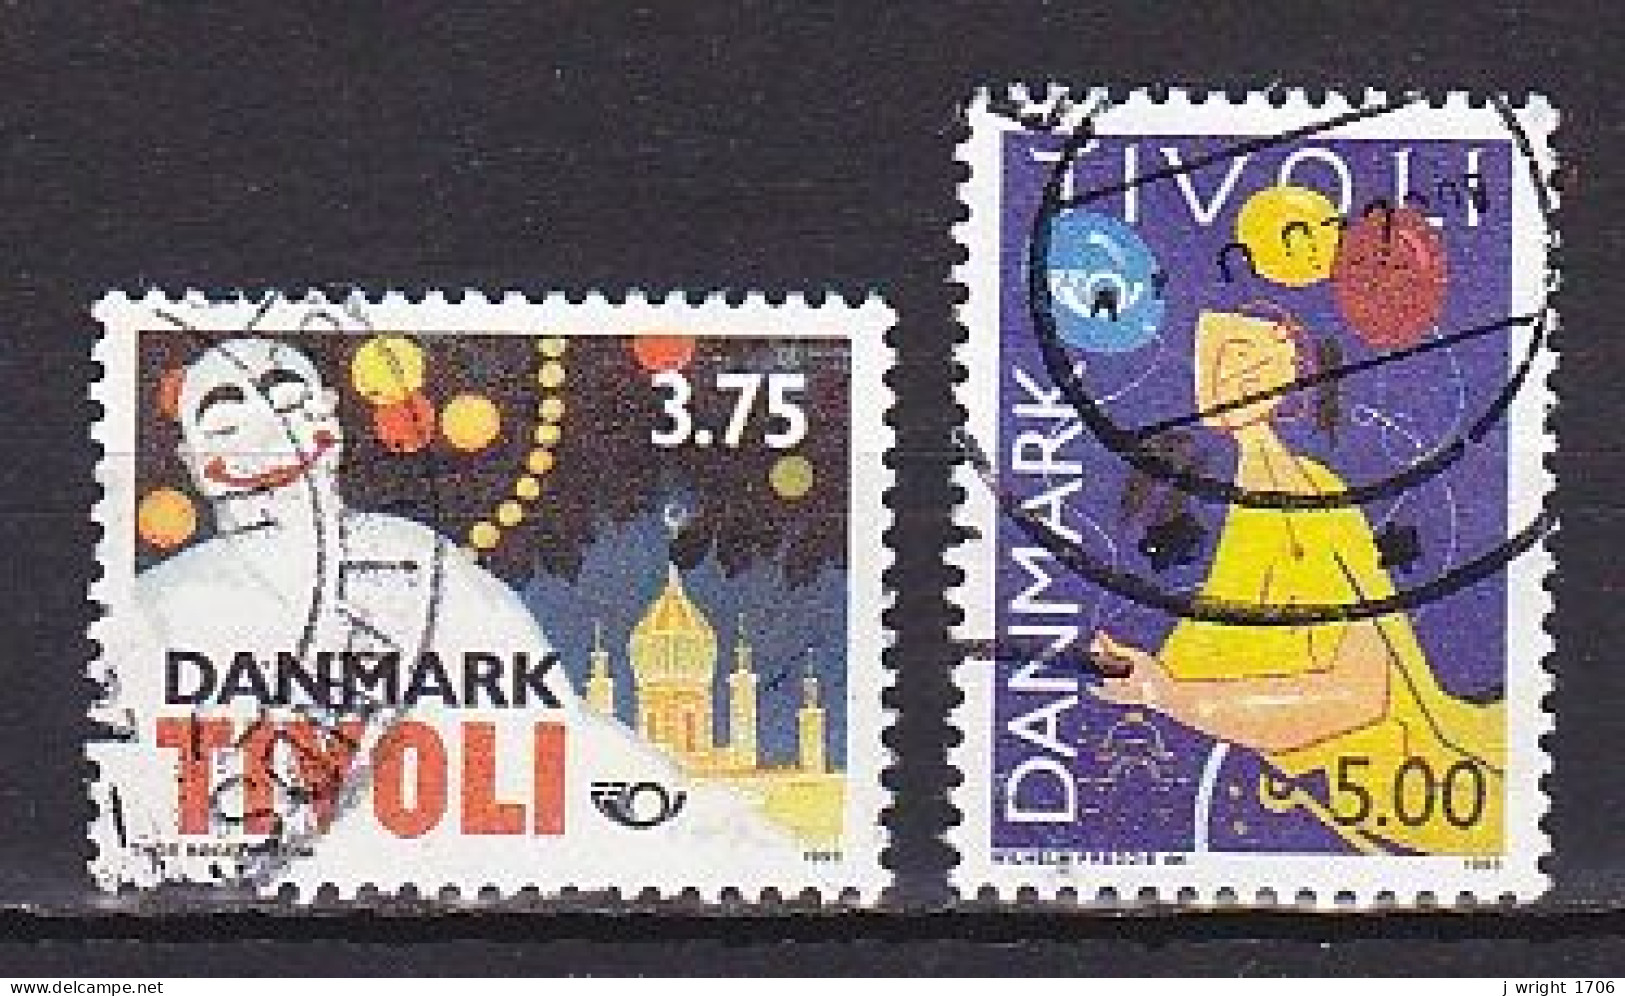 Denmark, 1993, Nordic Co-operation, Set, USED - Used Stamps